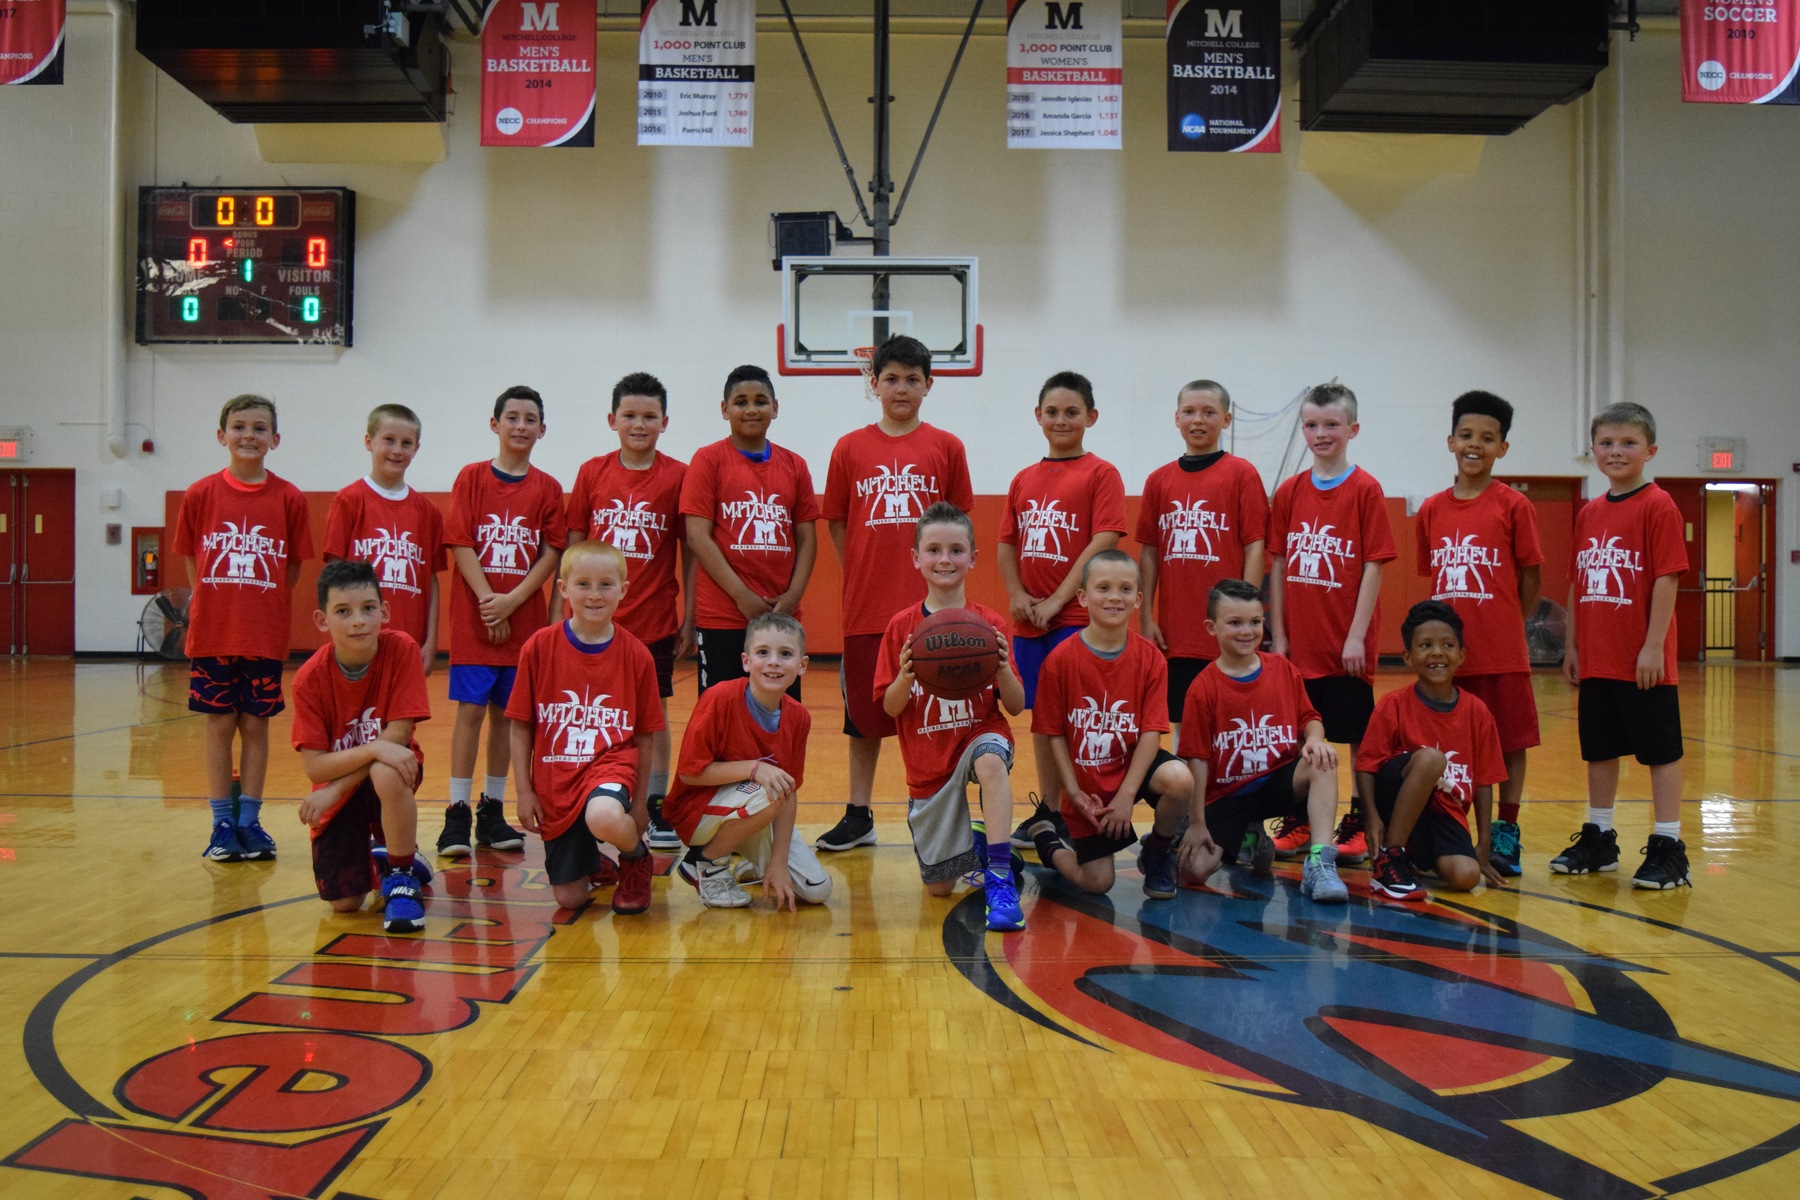 Dates Announced for 2020 Mitchell Basketball Skills Academy